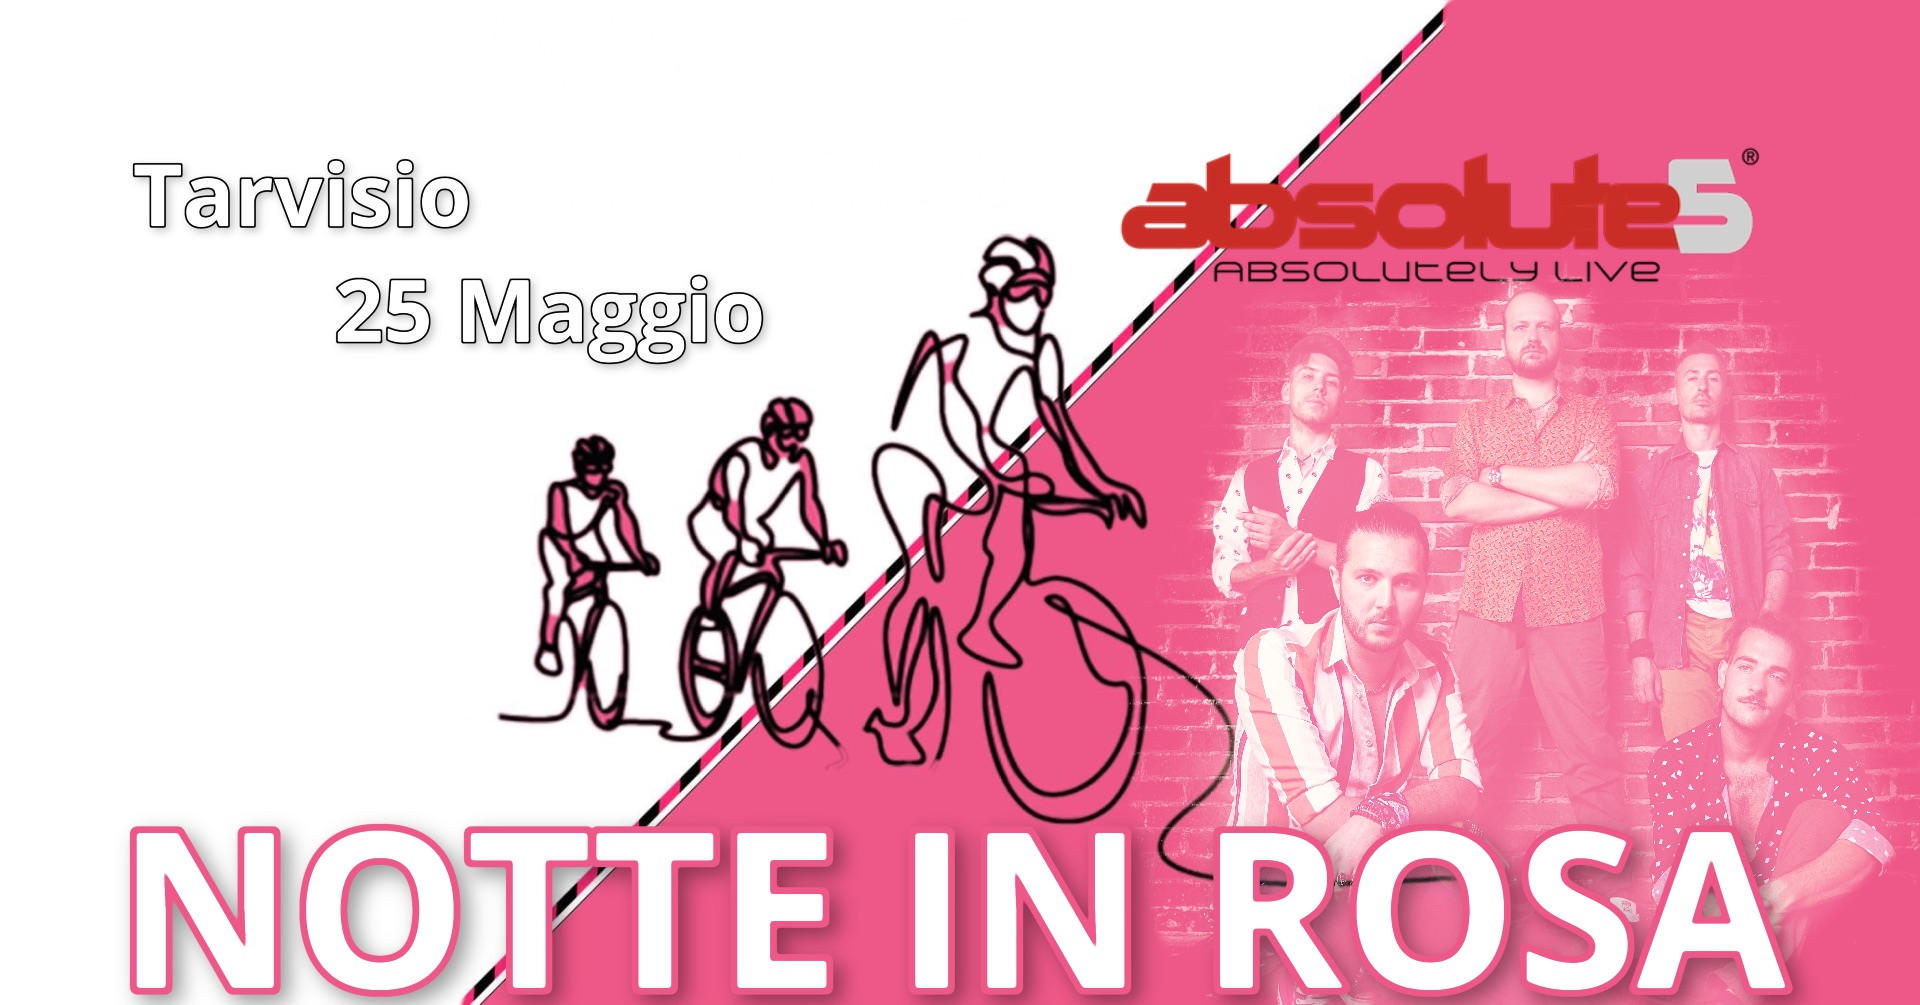 Absolute5 - Notte in Rosa - Tarvisio